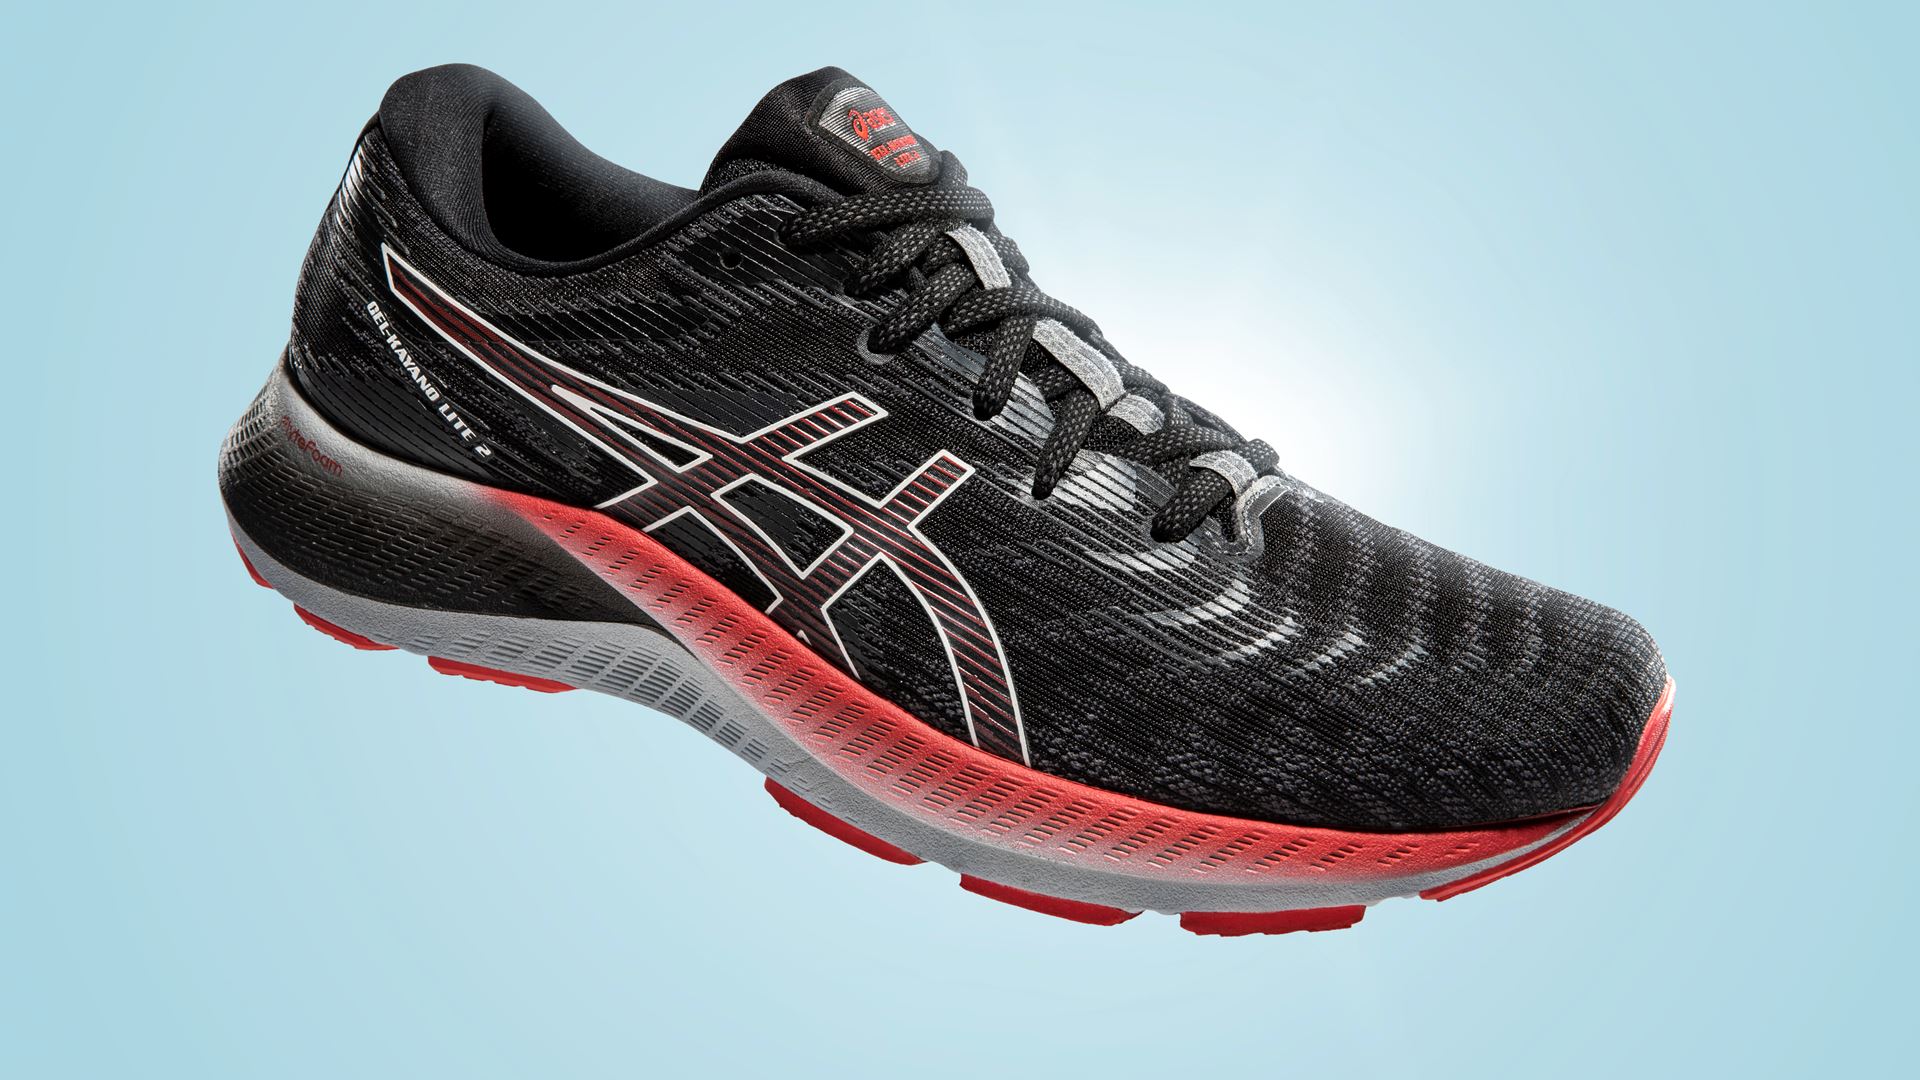 ASICS launches the GEL-KAYANO™ LITE 2, allowing runners to take the burden off the planet as well as their bodies